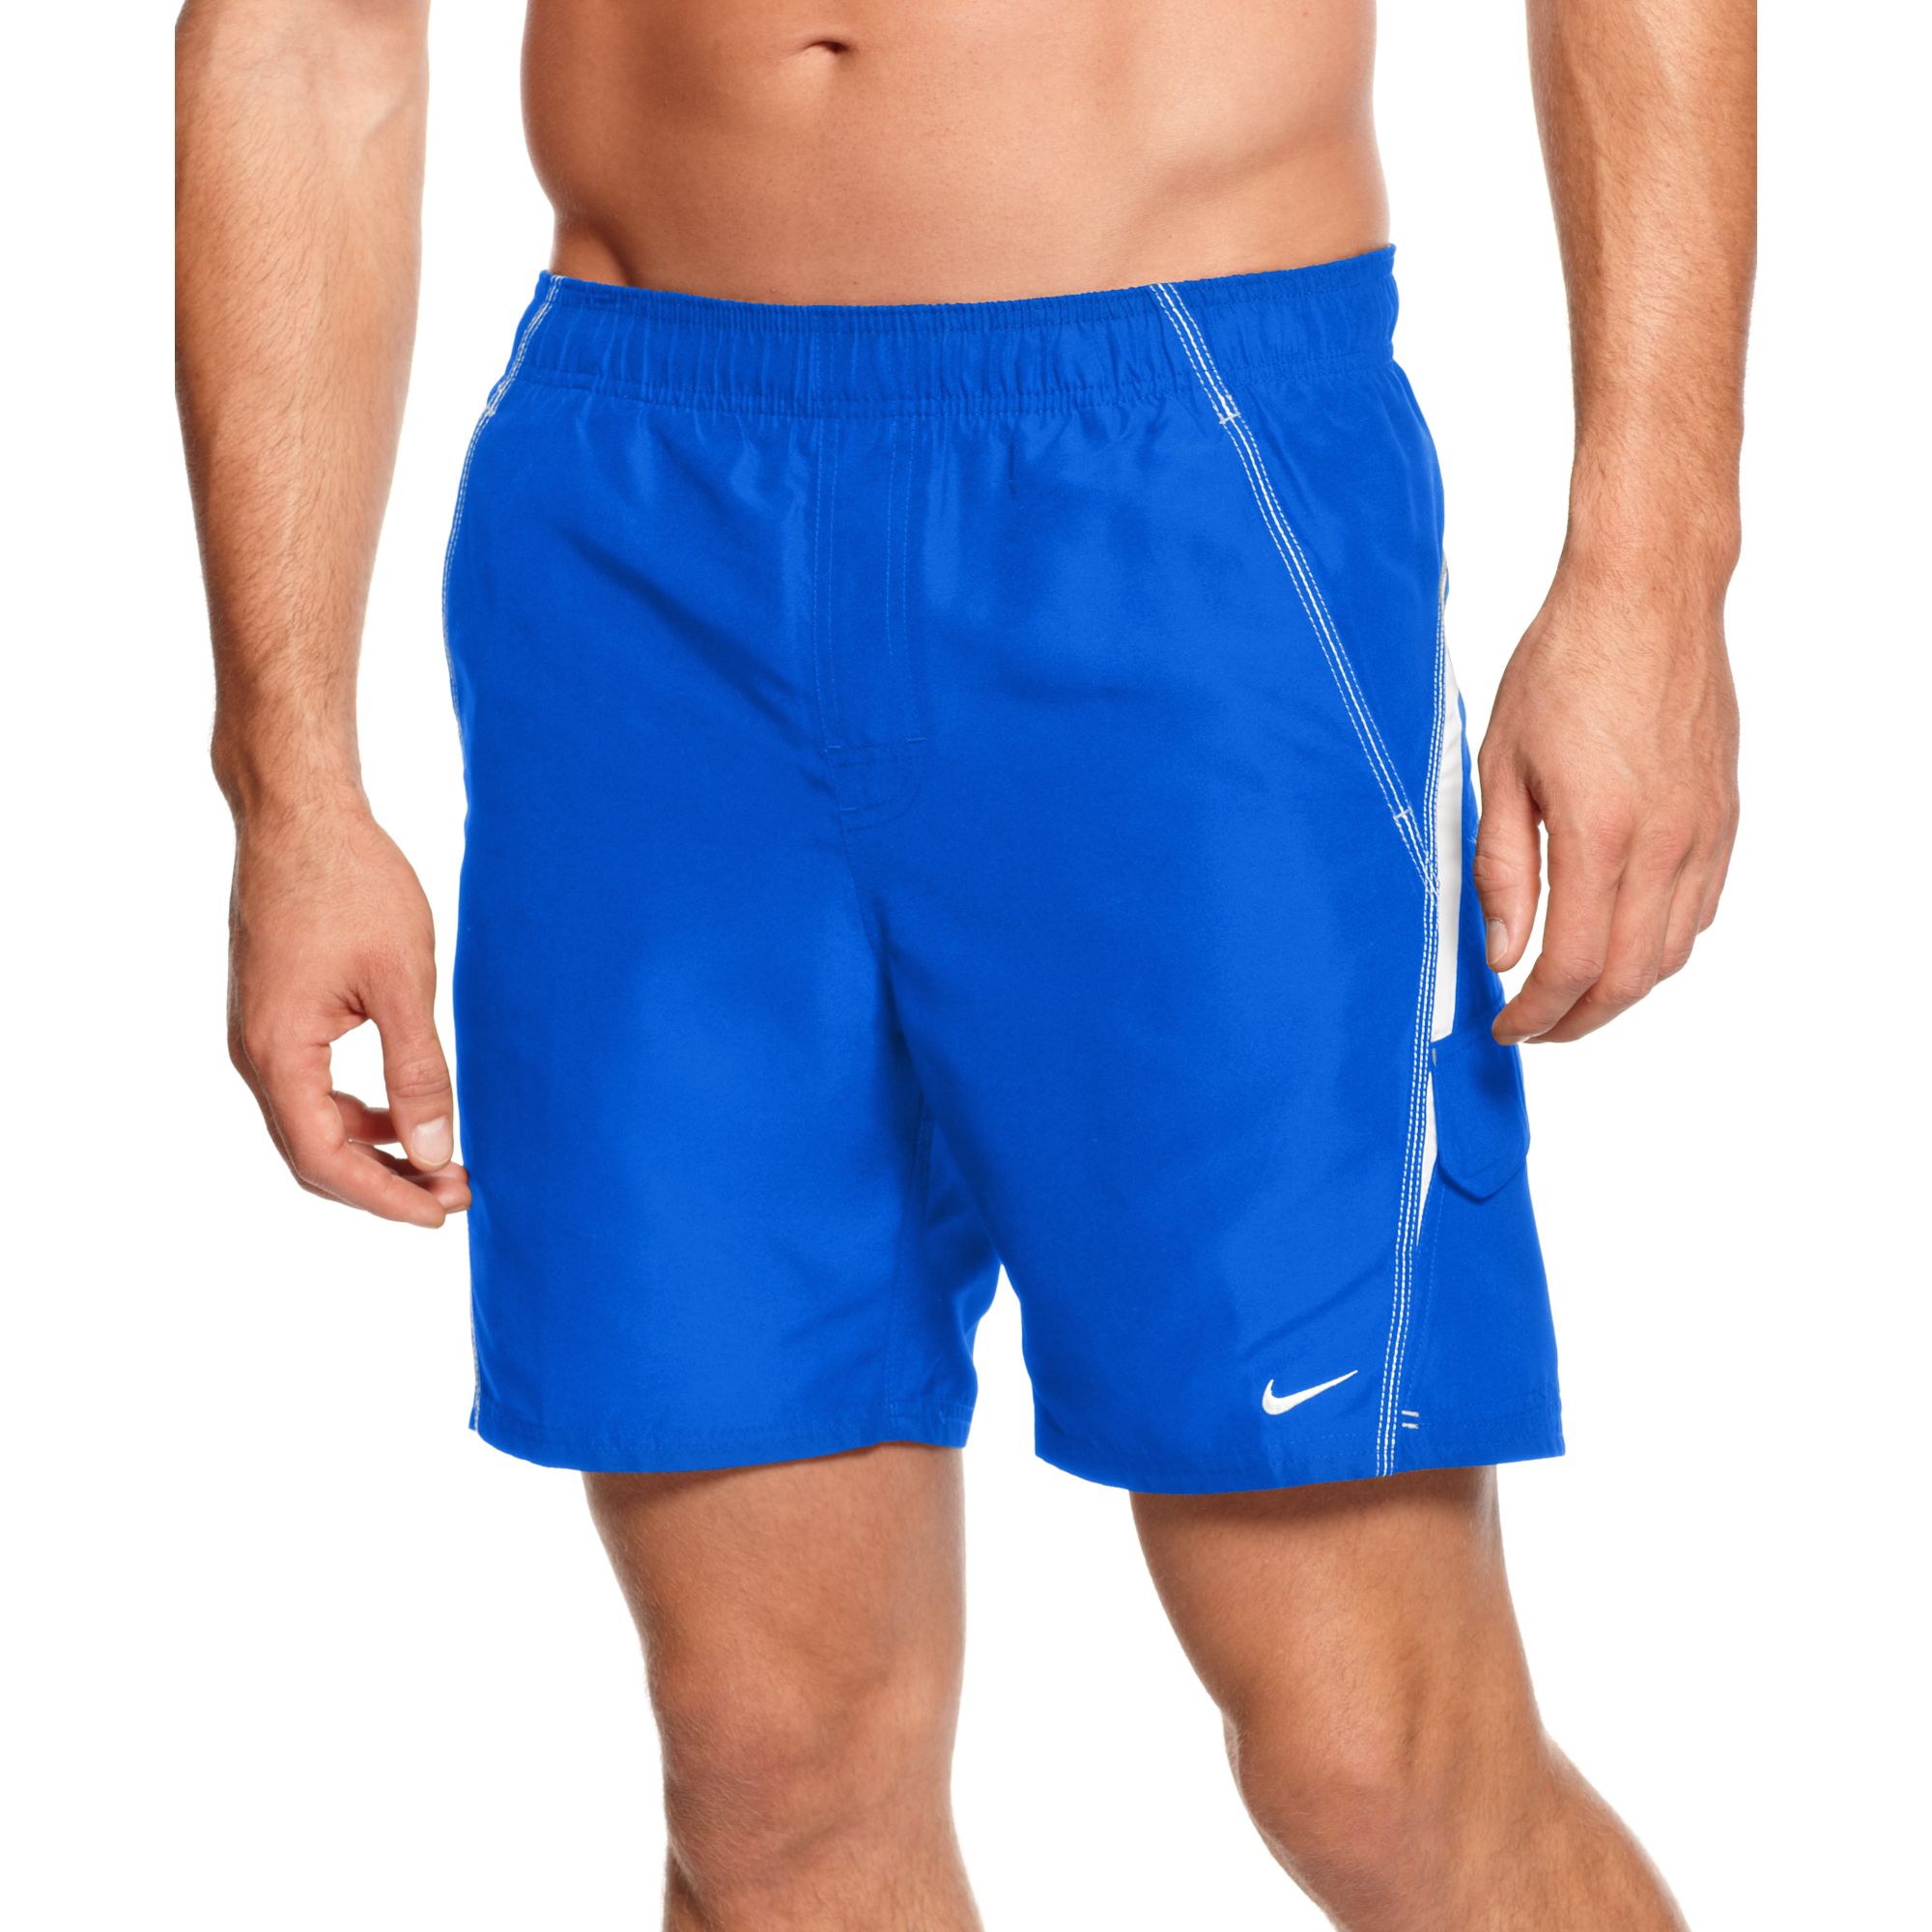 Lyst - Nike Core Velocity 7 Volley Swim Trunks in Blue for Men